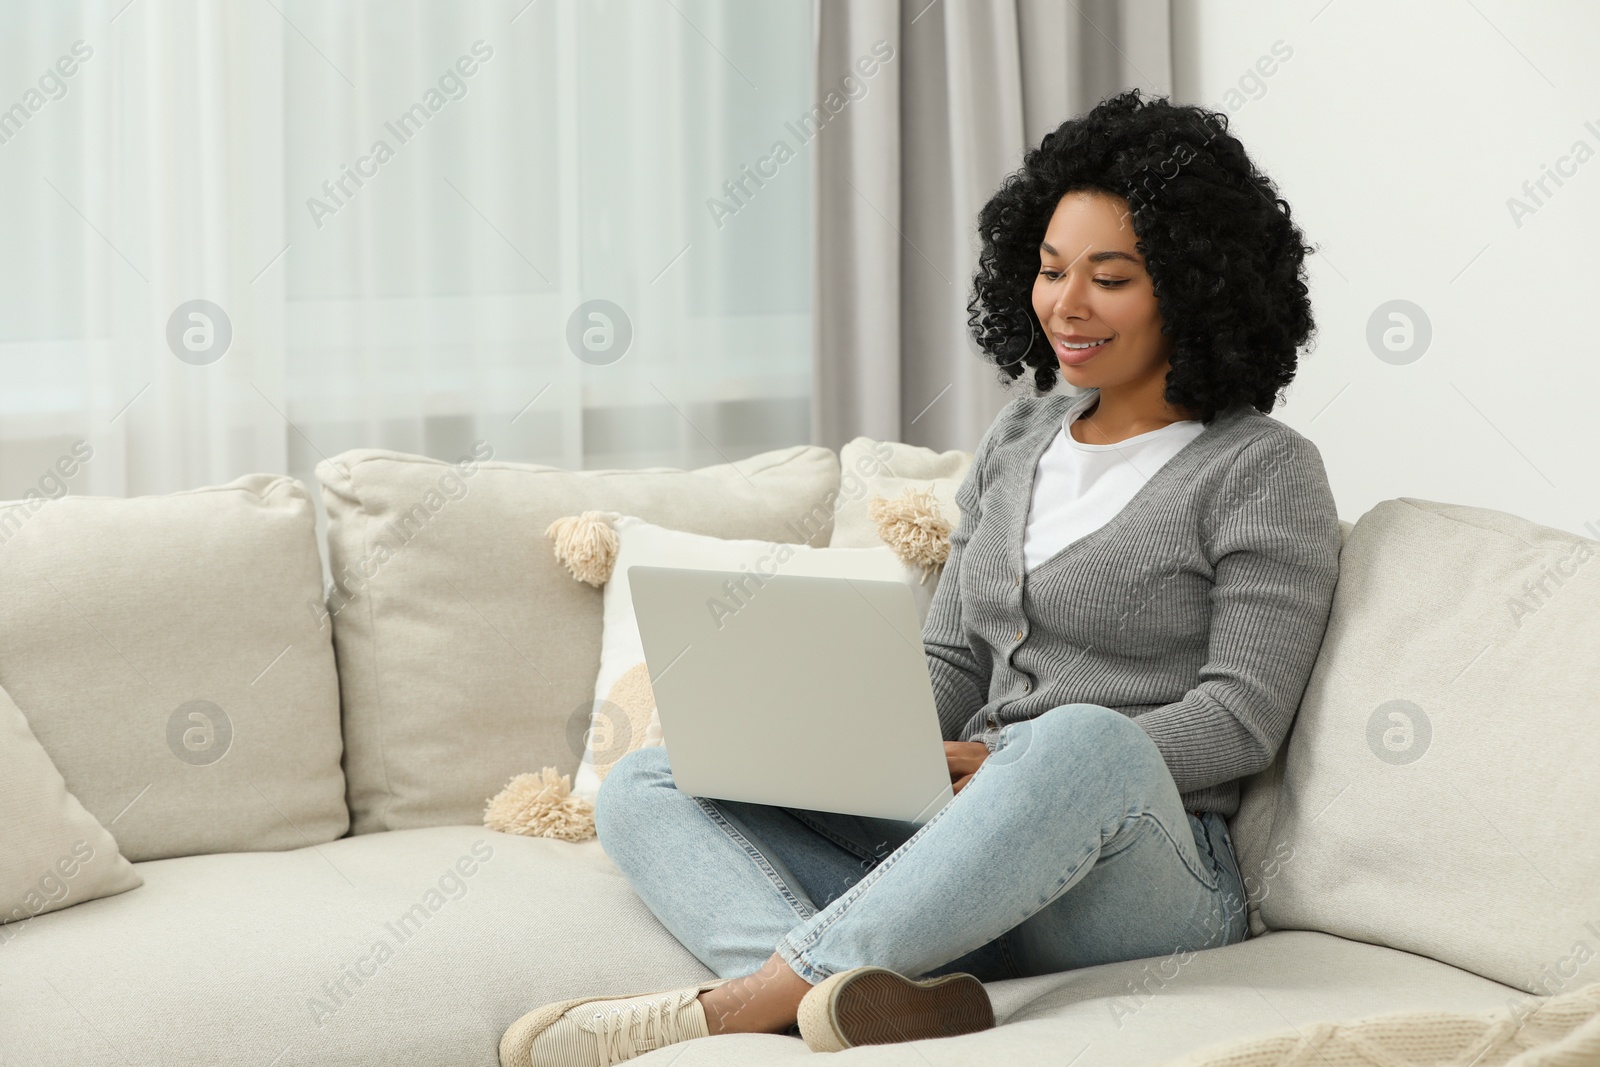 Photo of Happy young woman using laptop on sofa indoors. Space for text